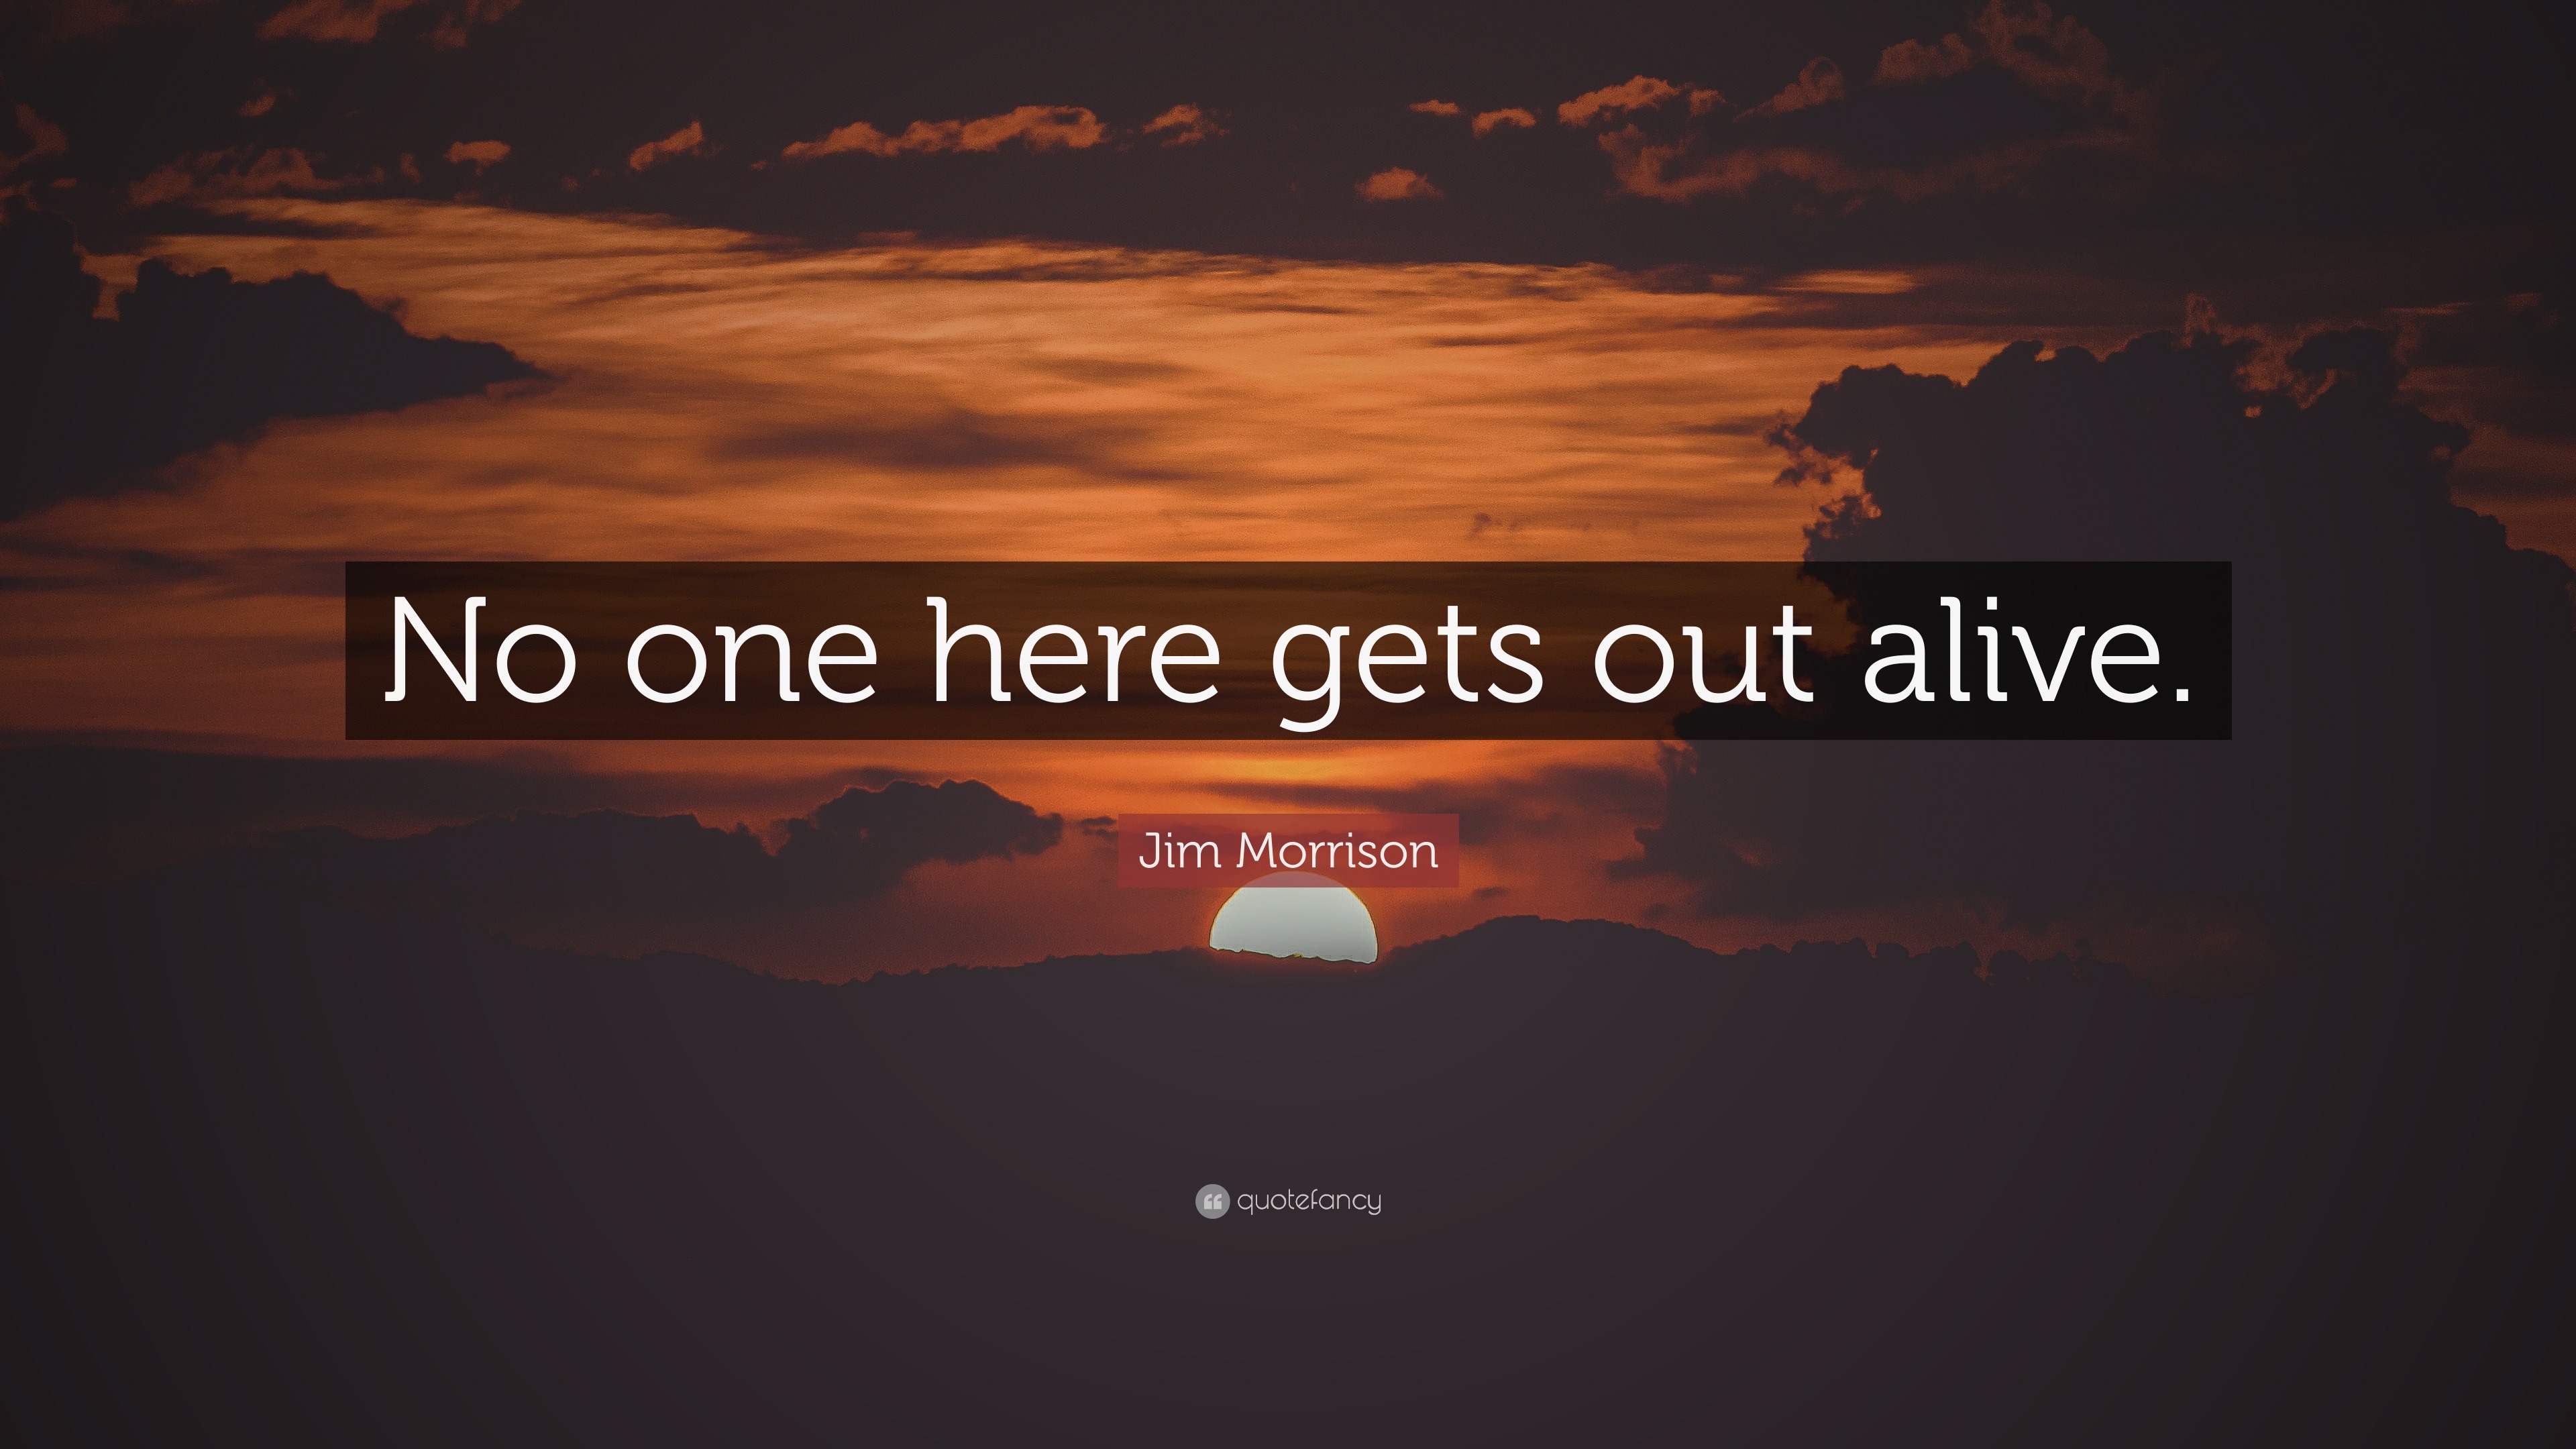 6361626 Jim Morrison Quote No One Here Gets Out Alive 